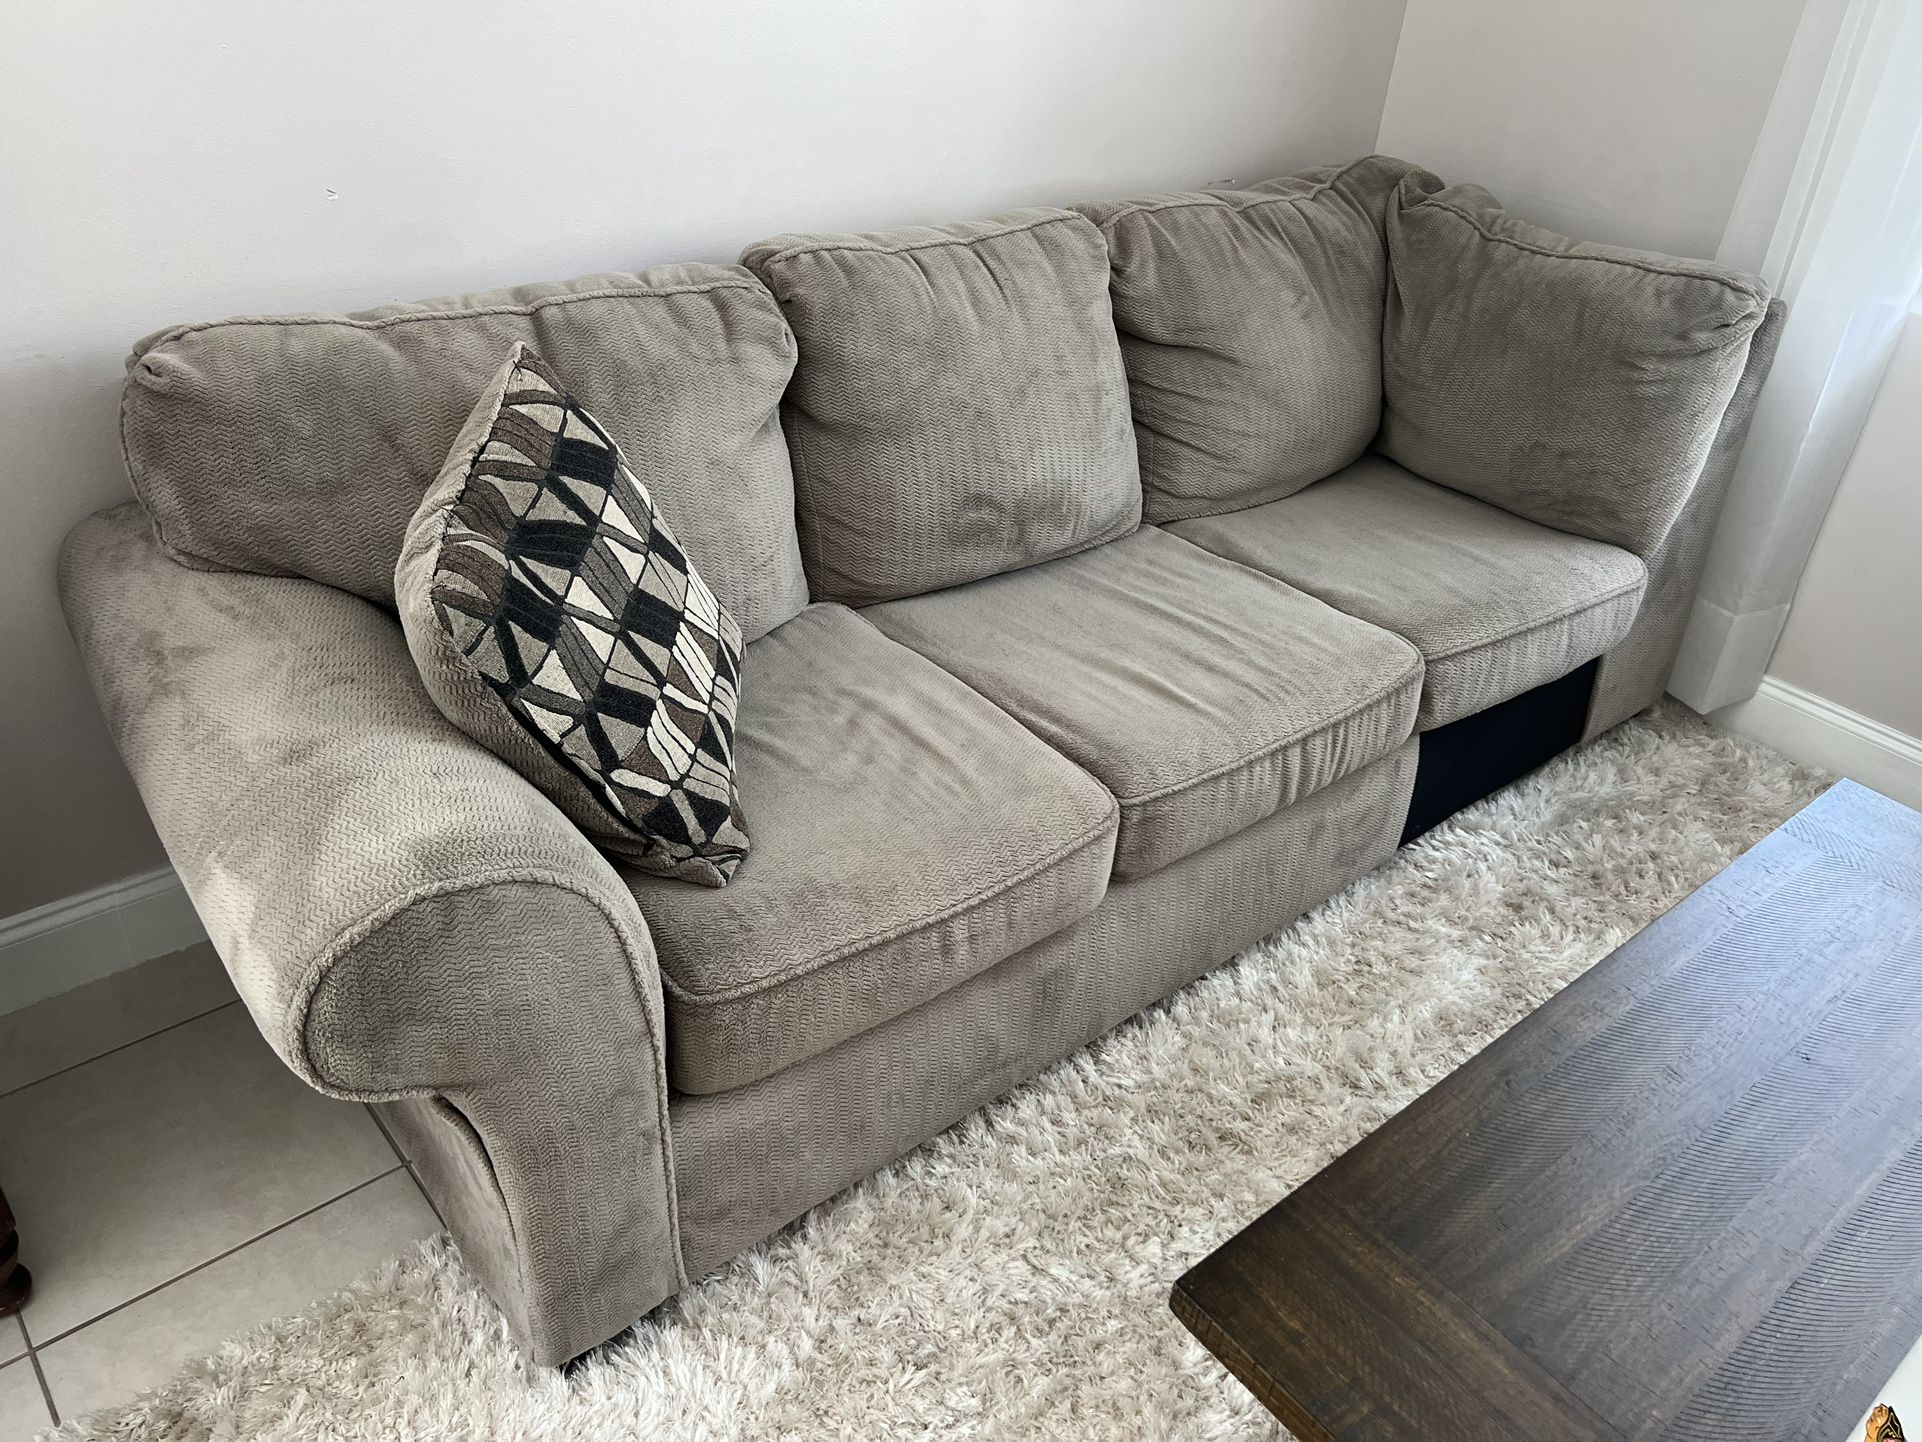 Delivery Available! Grey Upholstered Love Seat Living Room Sofa Couch! Clean and Comfortable! Good condition! Rip in back right corner, easy to concea